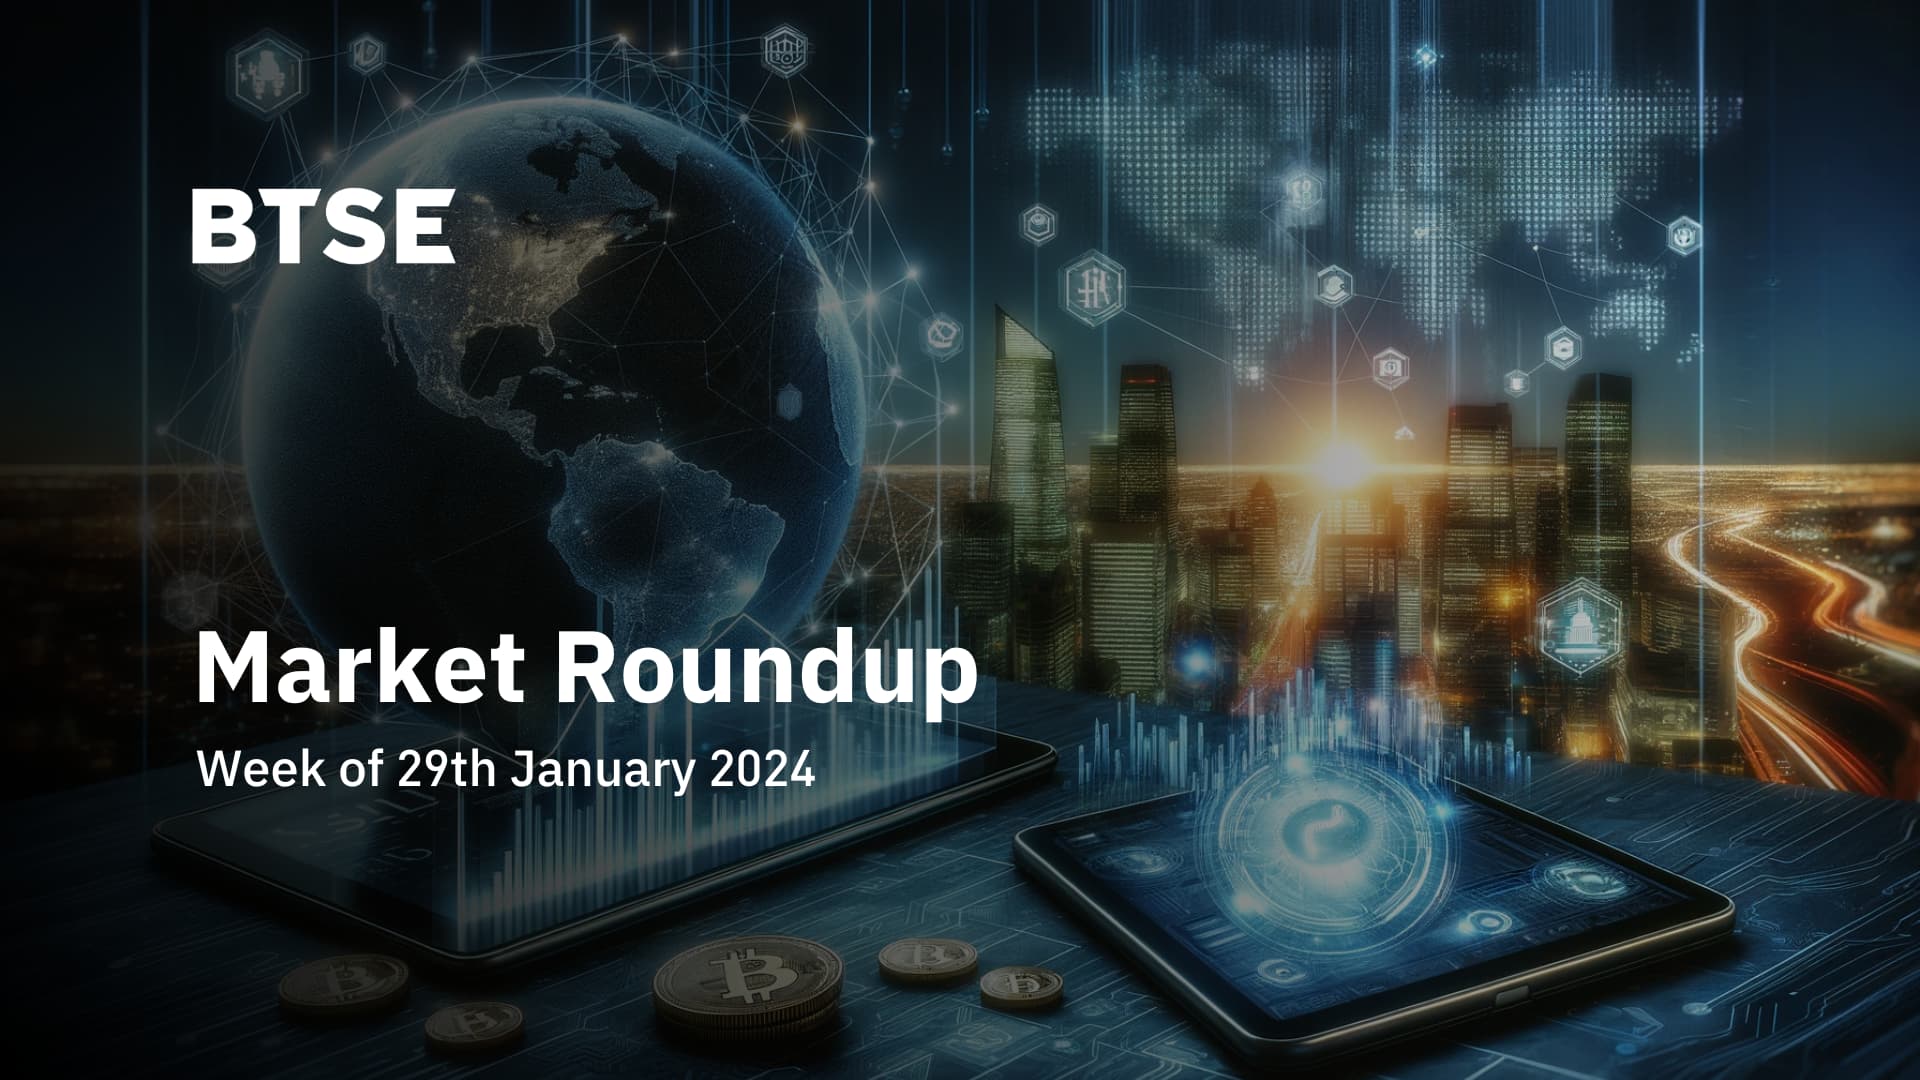 Market Roundup: Valkyrie's Security Leap, "Killer Whales" Dive, and El Salvador's Bitcoin Bet